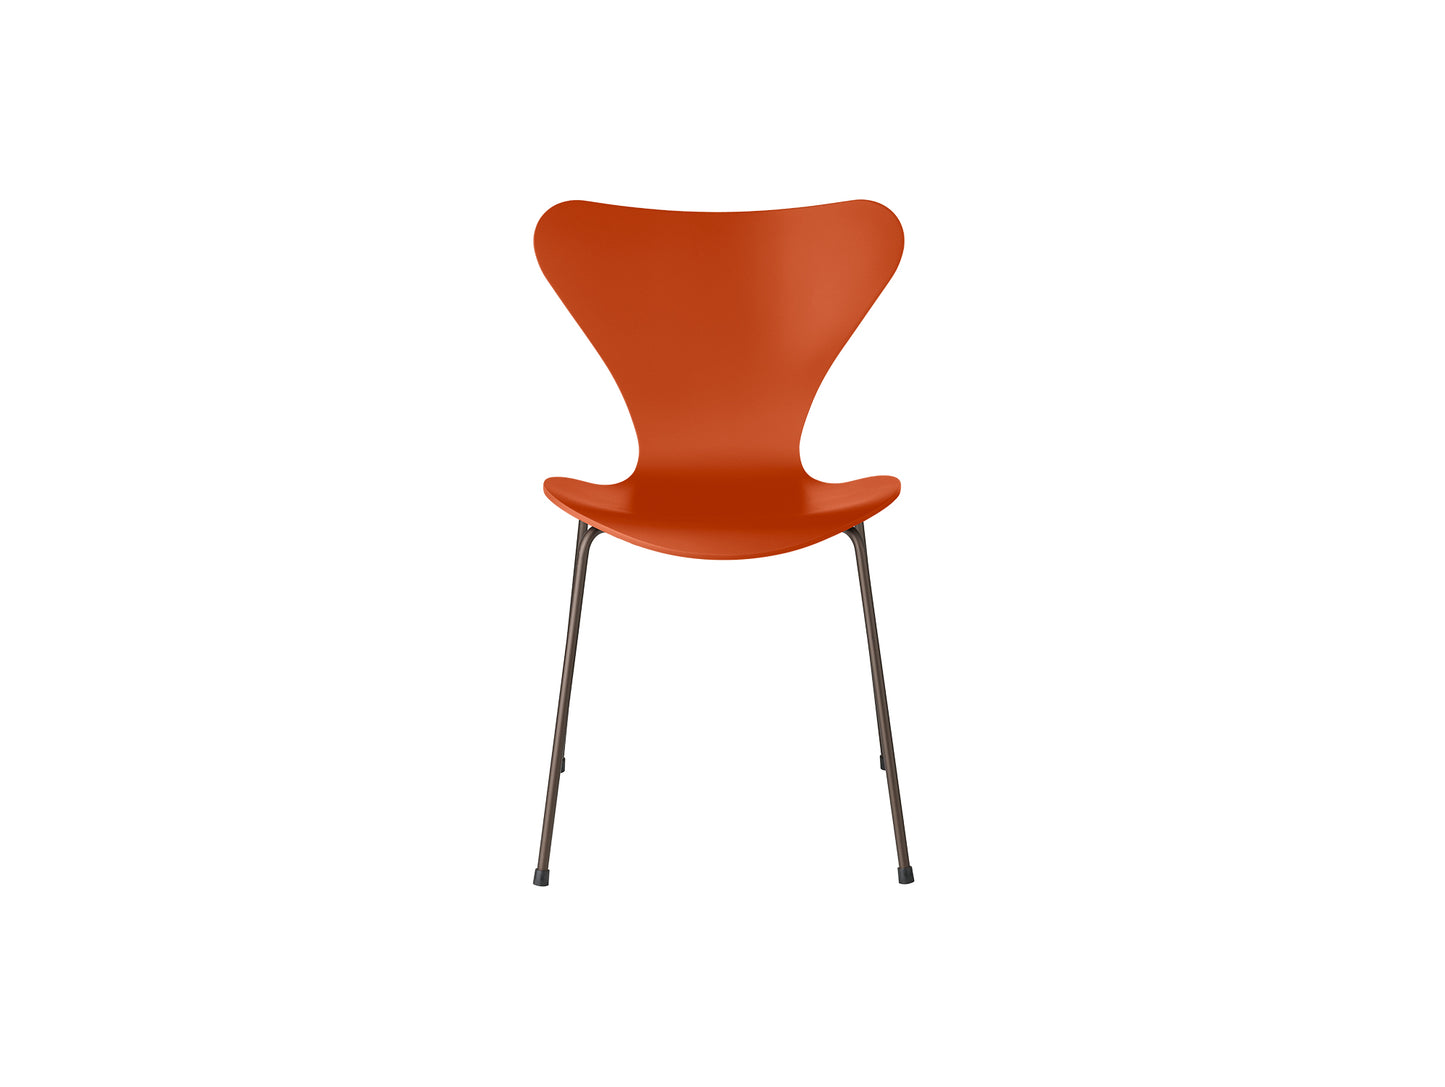 Series 7™ 3107 Dining Chair by Fritz Hansen - Paradise Orange Lacquered Veneer Shell / Brown Bronze Steel